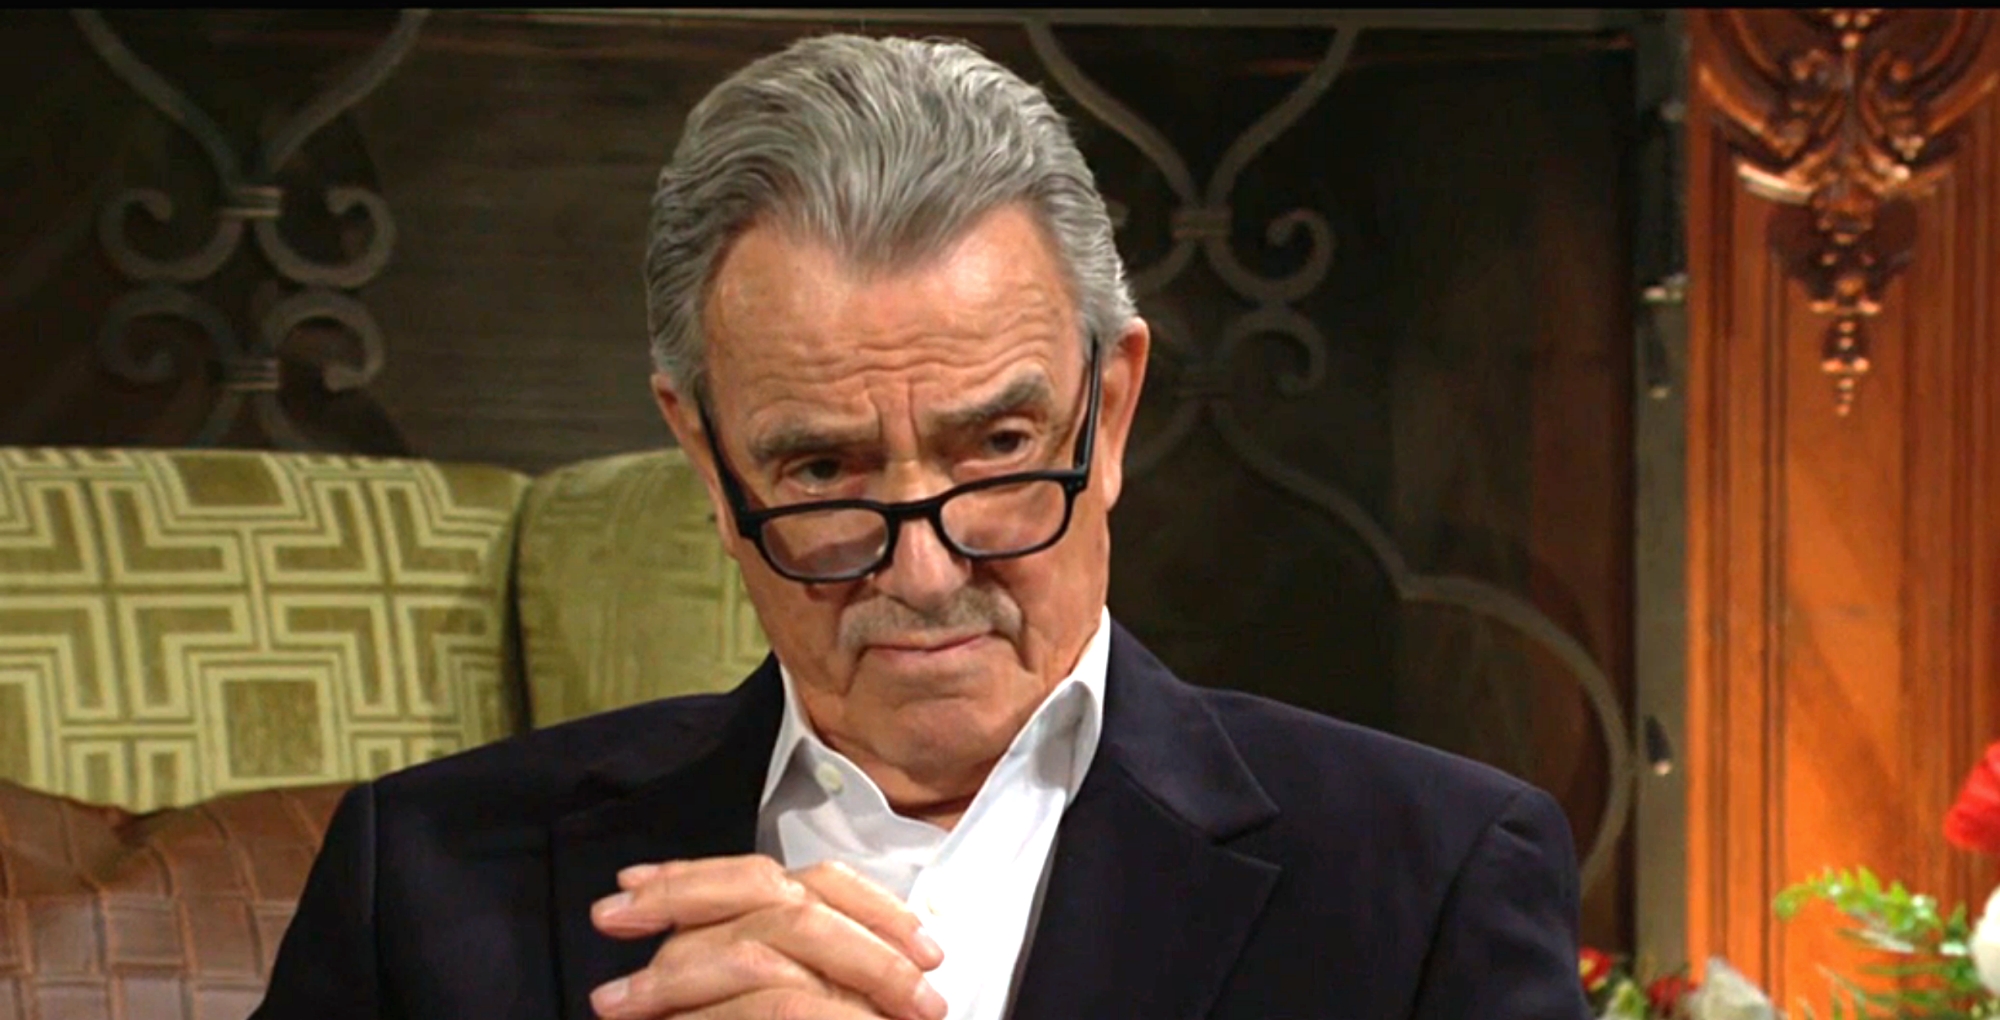 victor newman has a plan on the young and the restless.